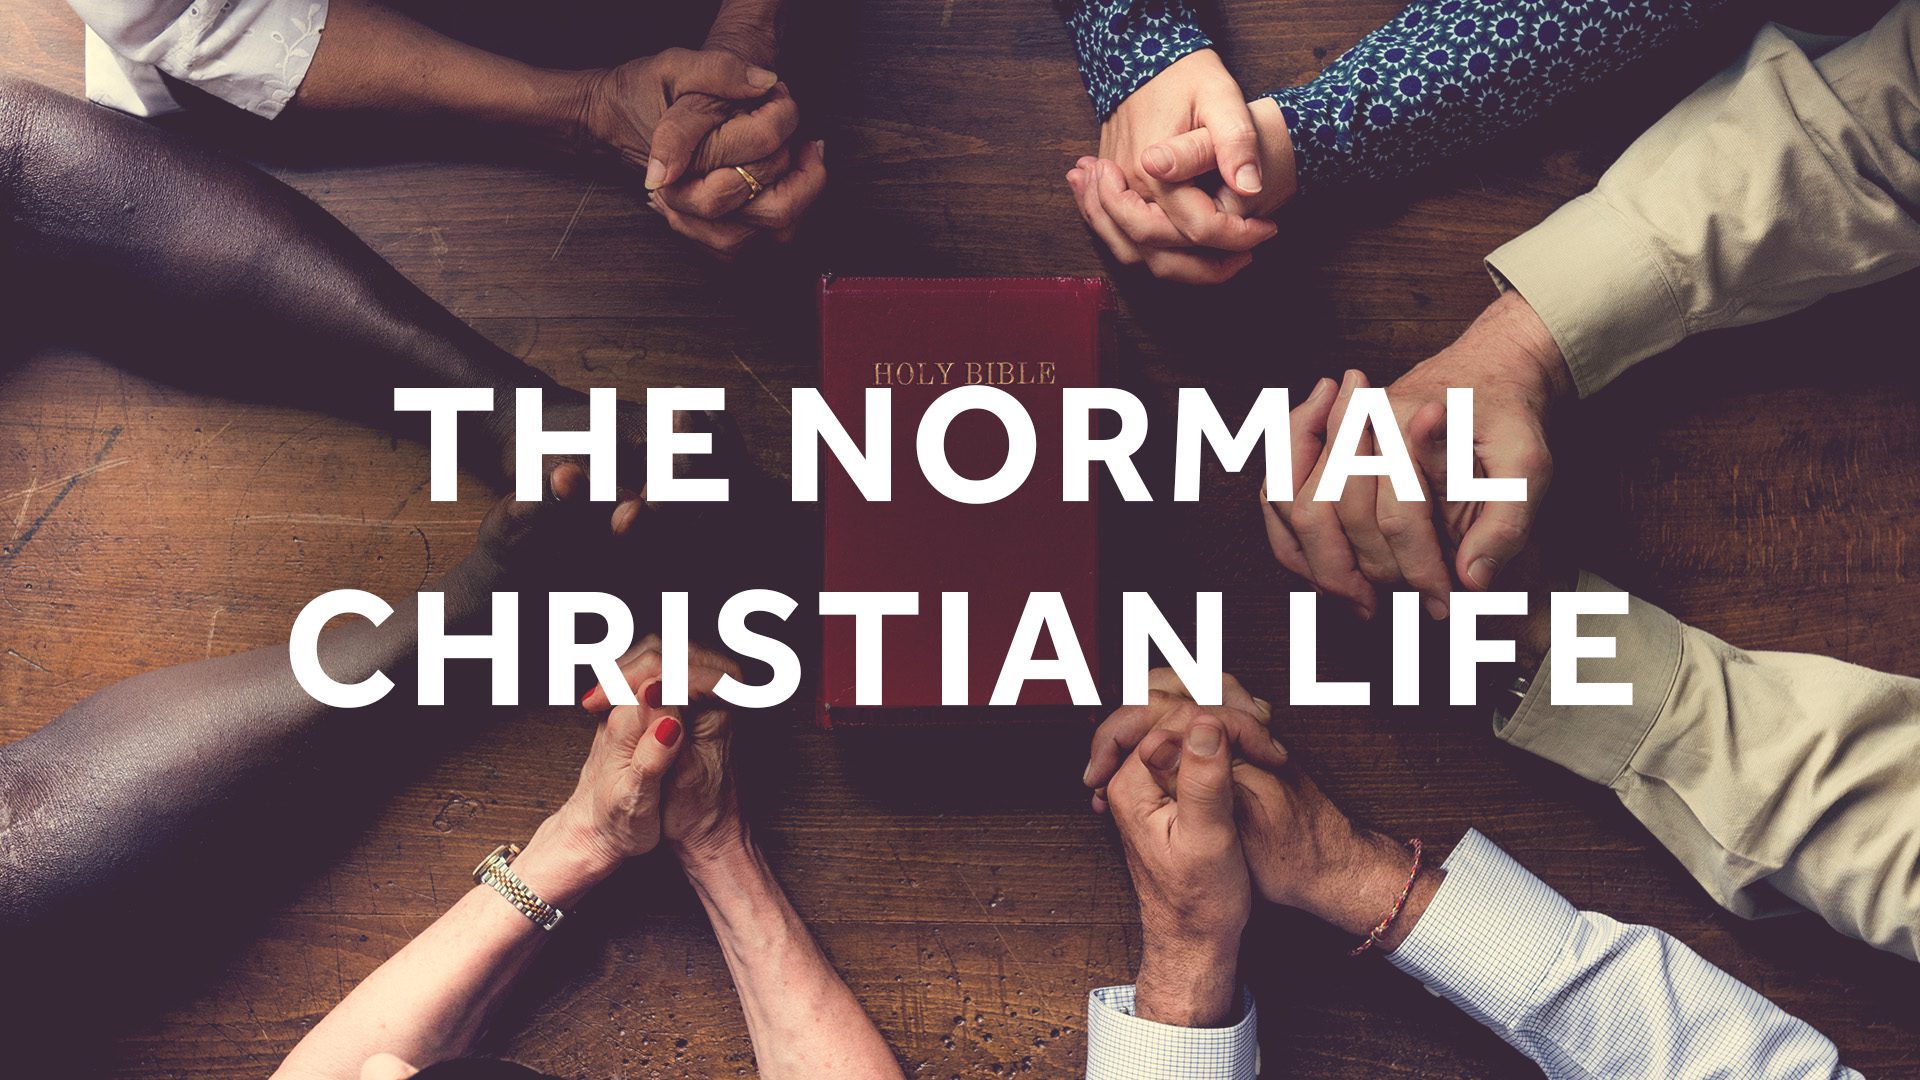 The Normal Christian Life